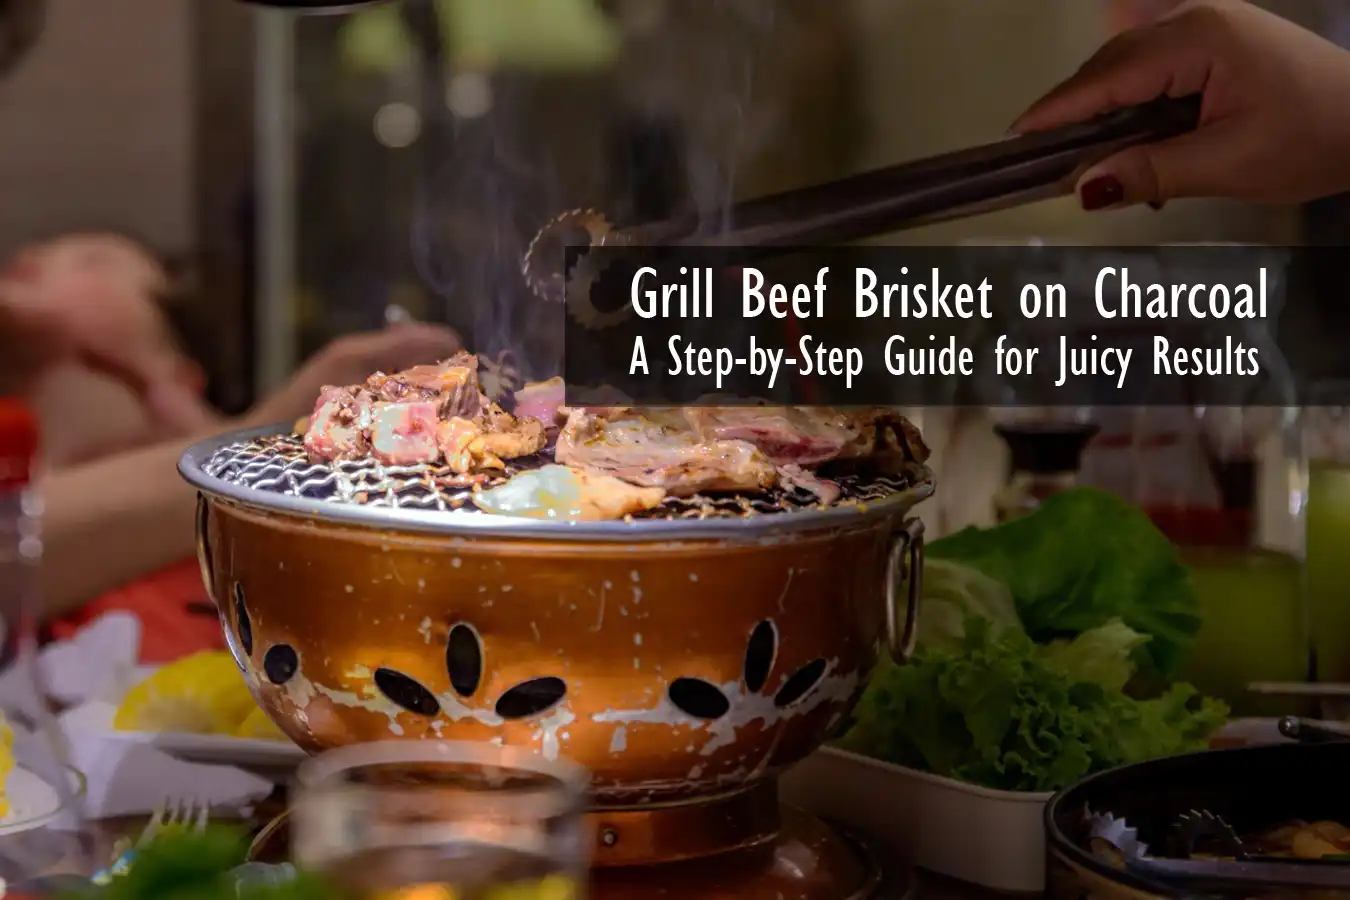 How to Grill Beef Brisket on Charcoal